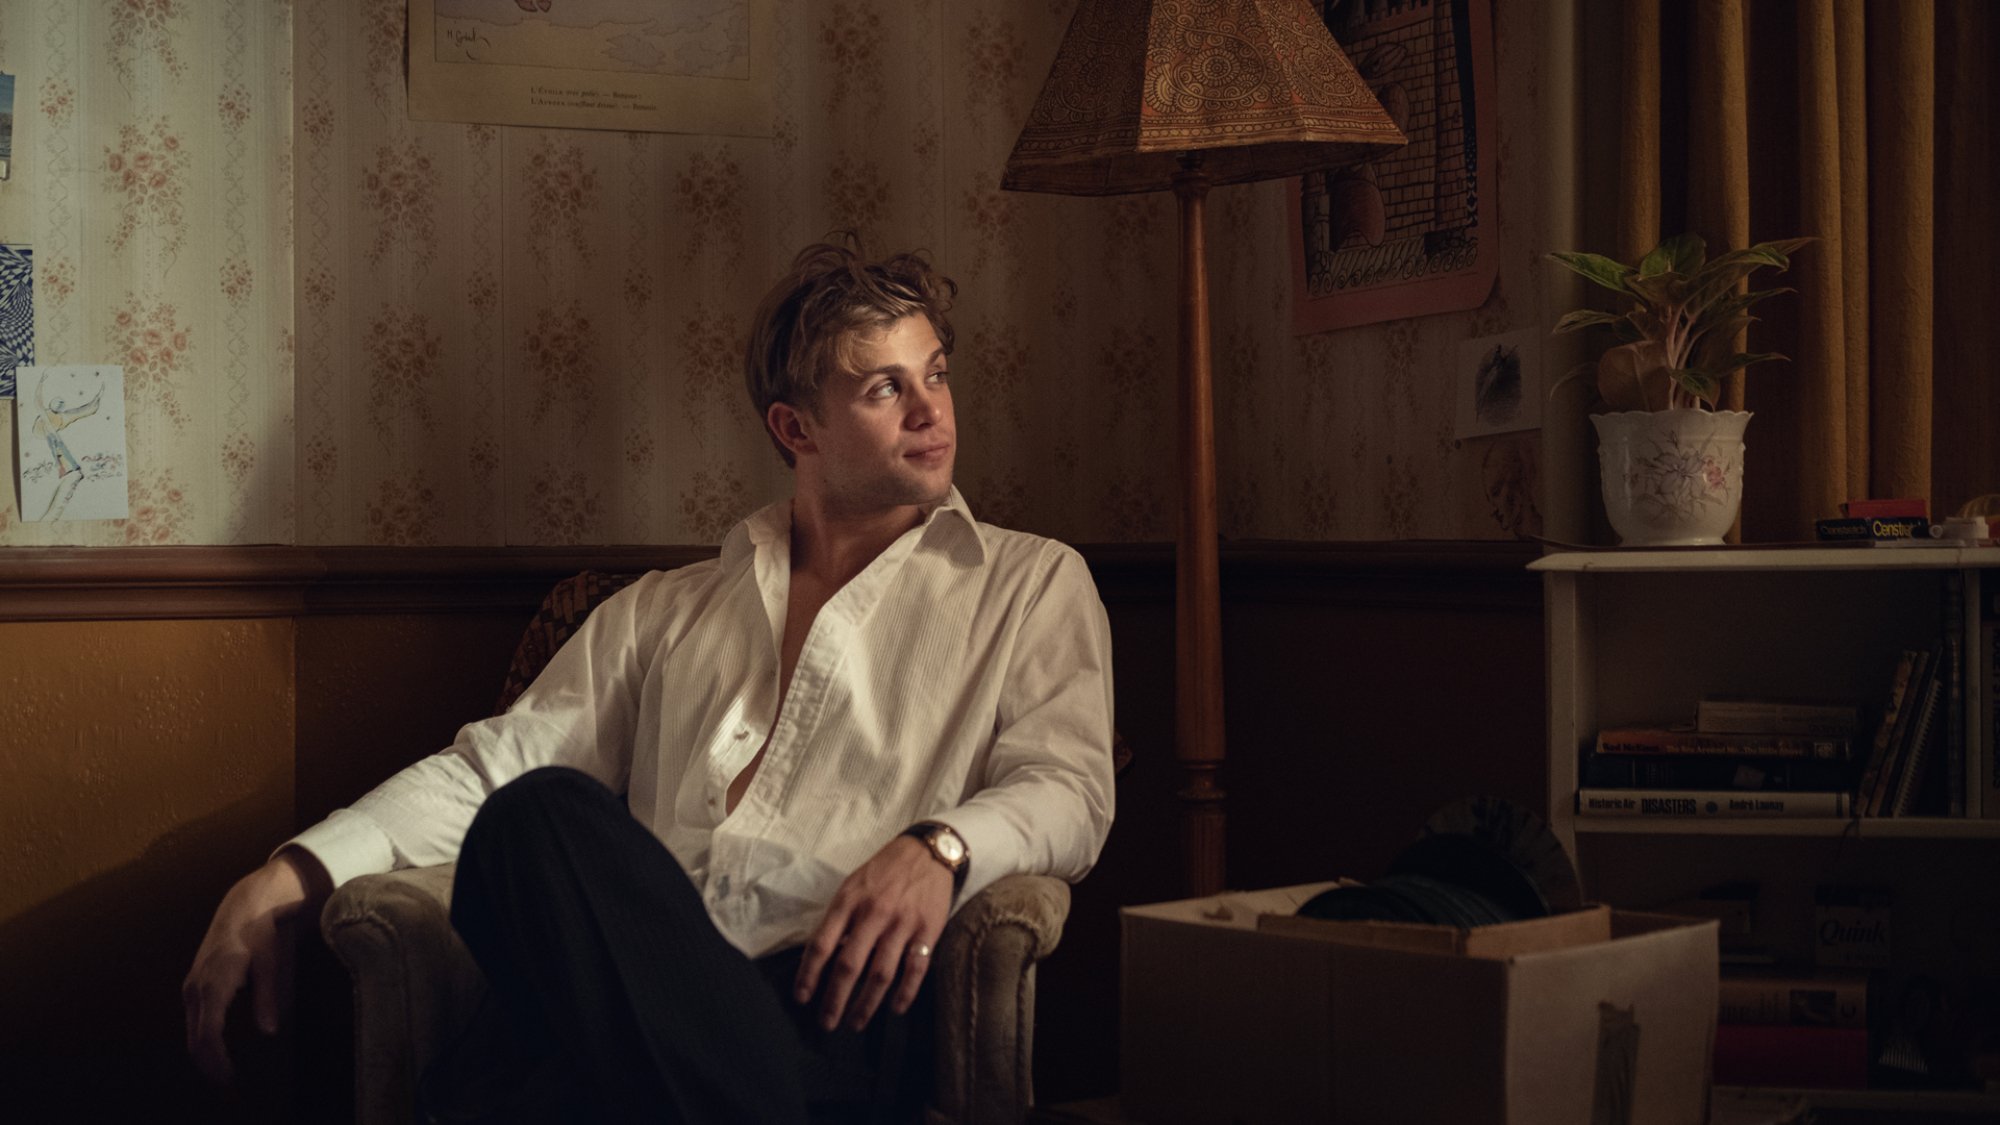 A young man in a white shirt sits in a dimly lit but opulent room.